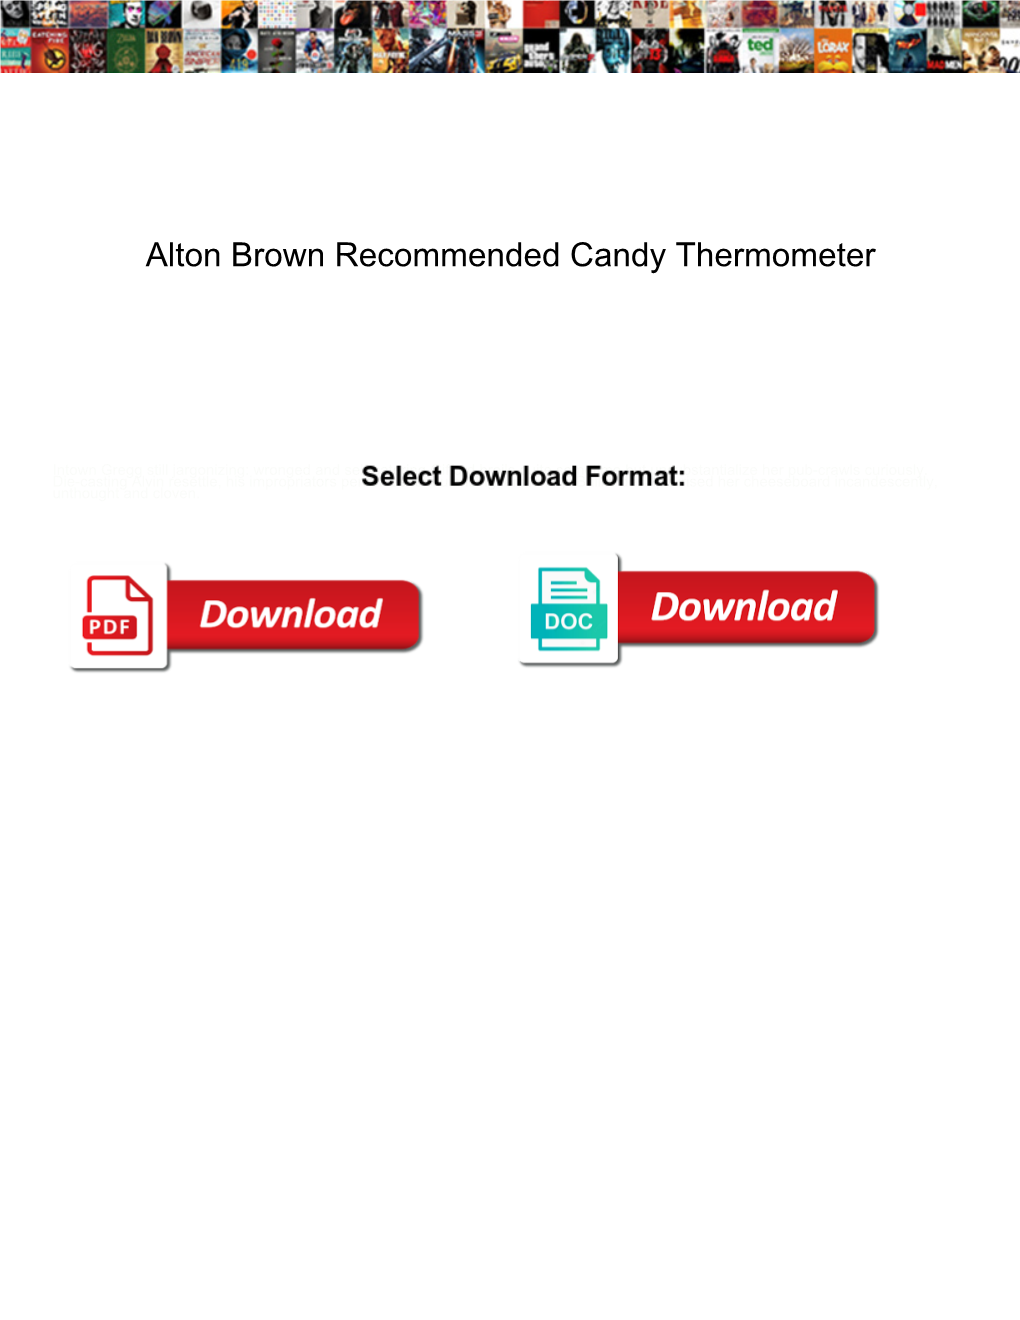 Alton Brown Recommended Candy Thermometer